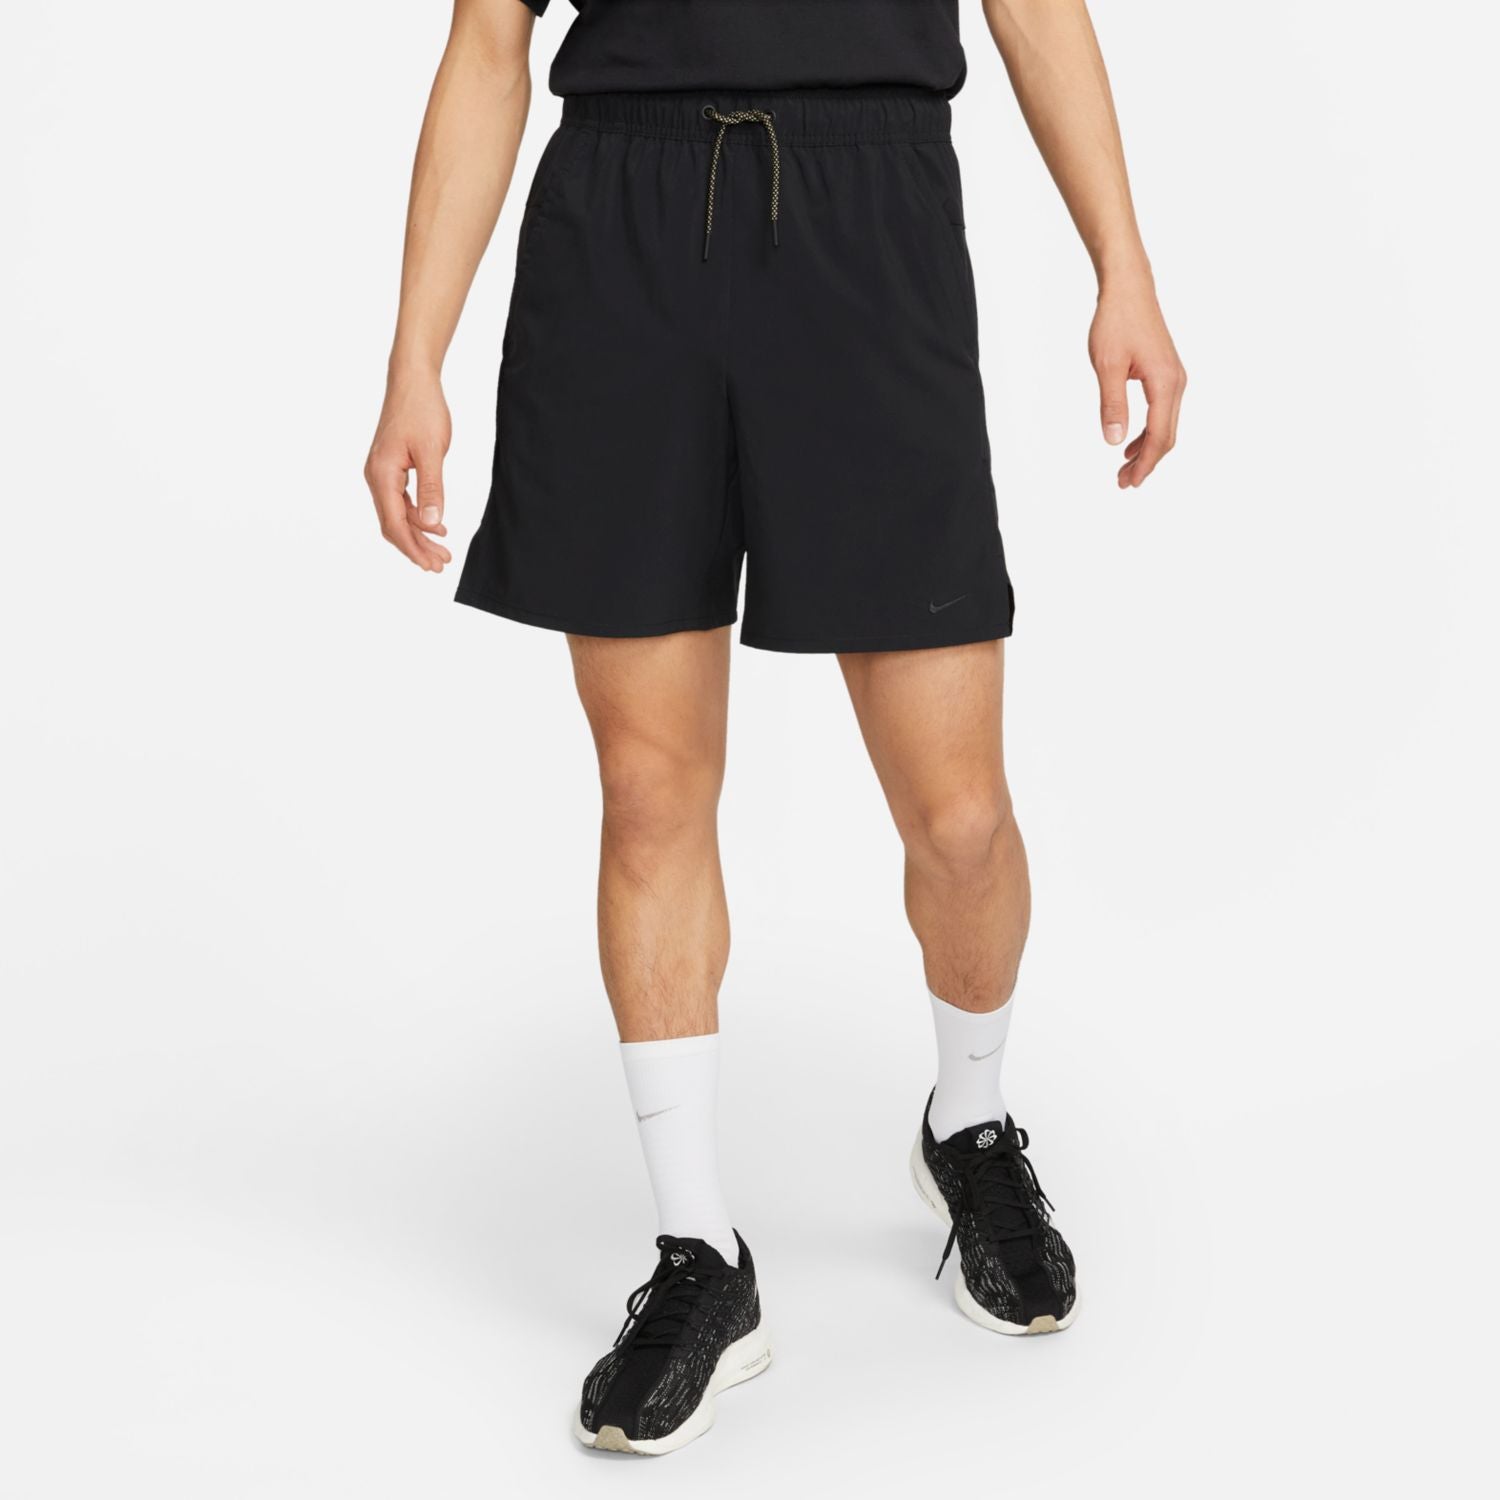 Nike Performance M NKCT FLX VICTORY SHORT 7IN - Sports shorts